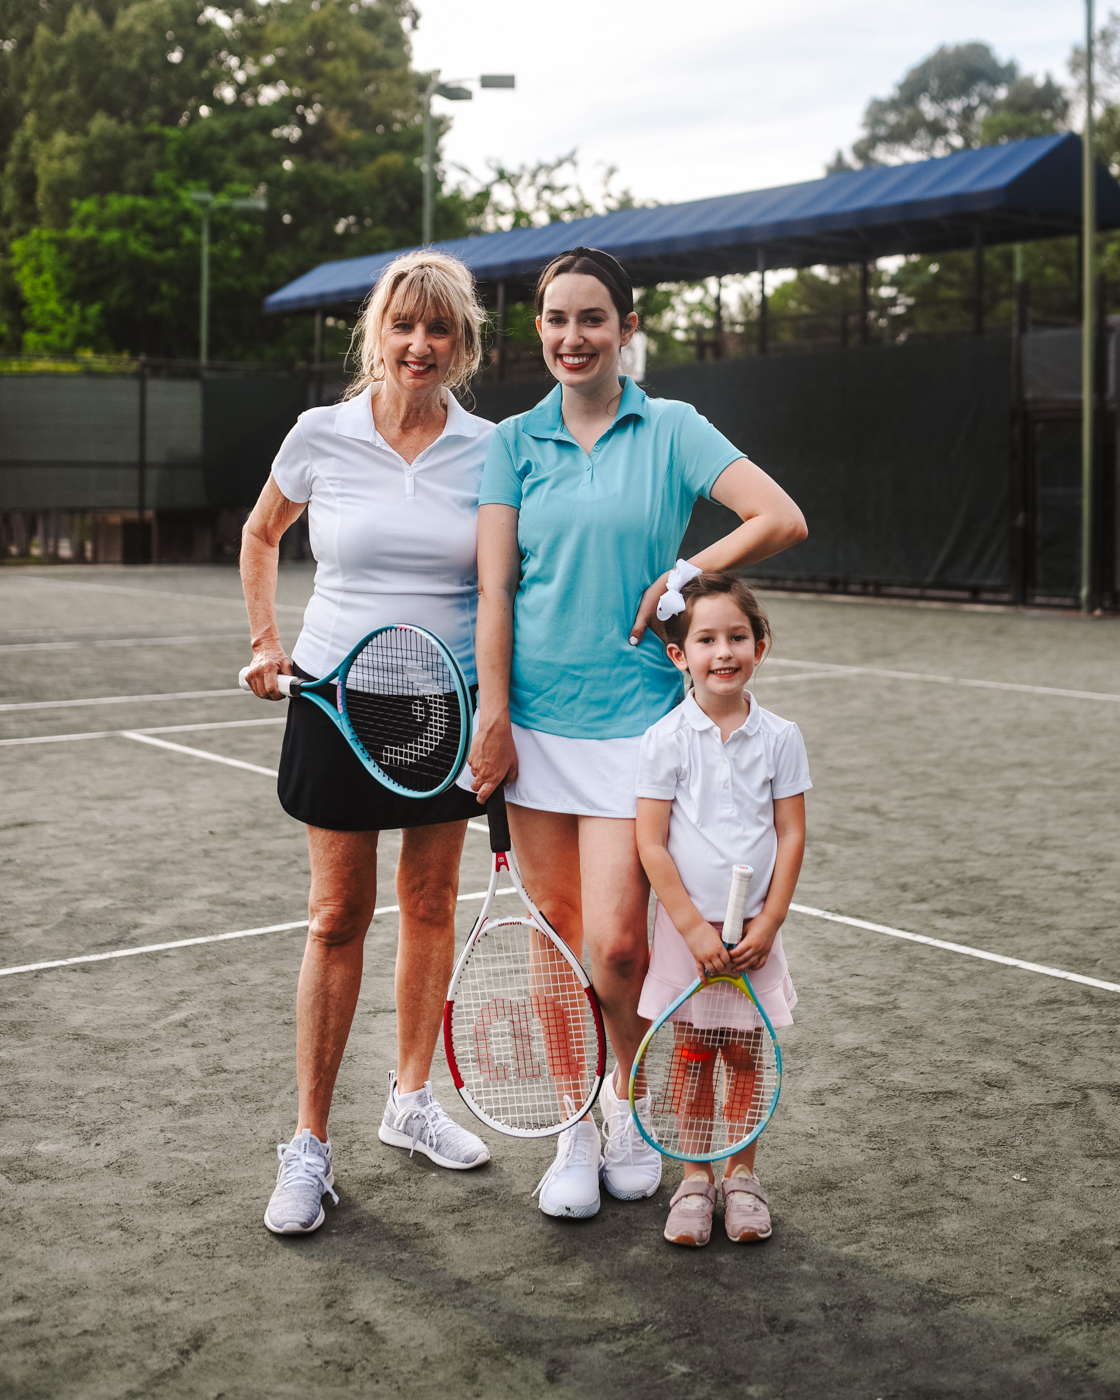 Tennis Outfits by popular Memphis fashion blog, Lone Star Looking Glass: image of three women standing together on a tennis court and holding tennis rackets and wearing tennis outfits. 